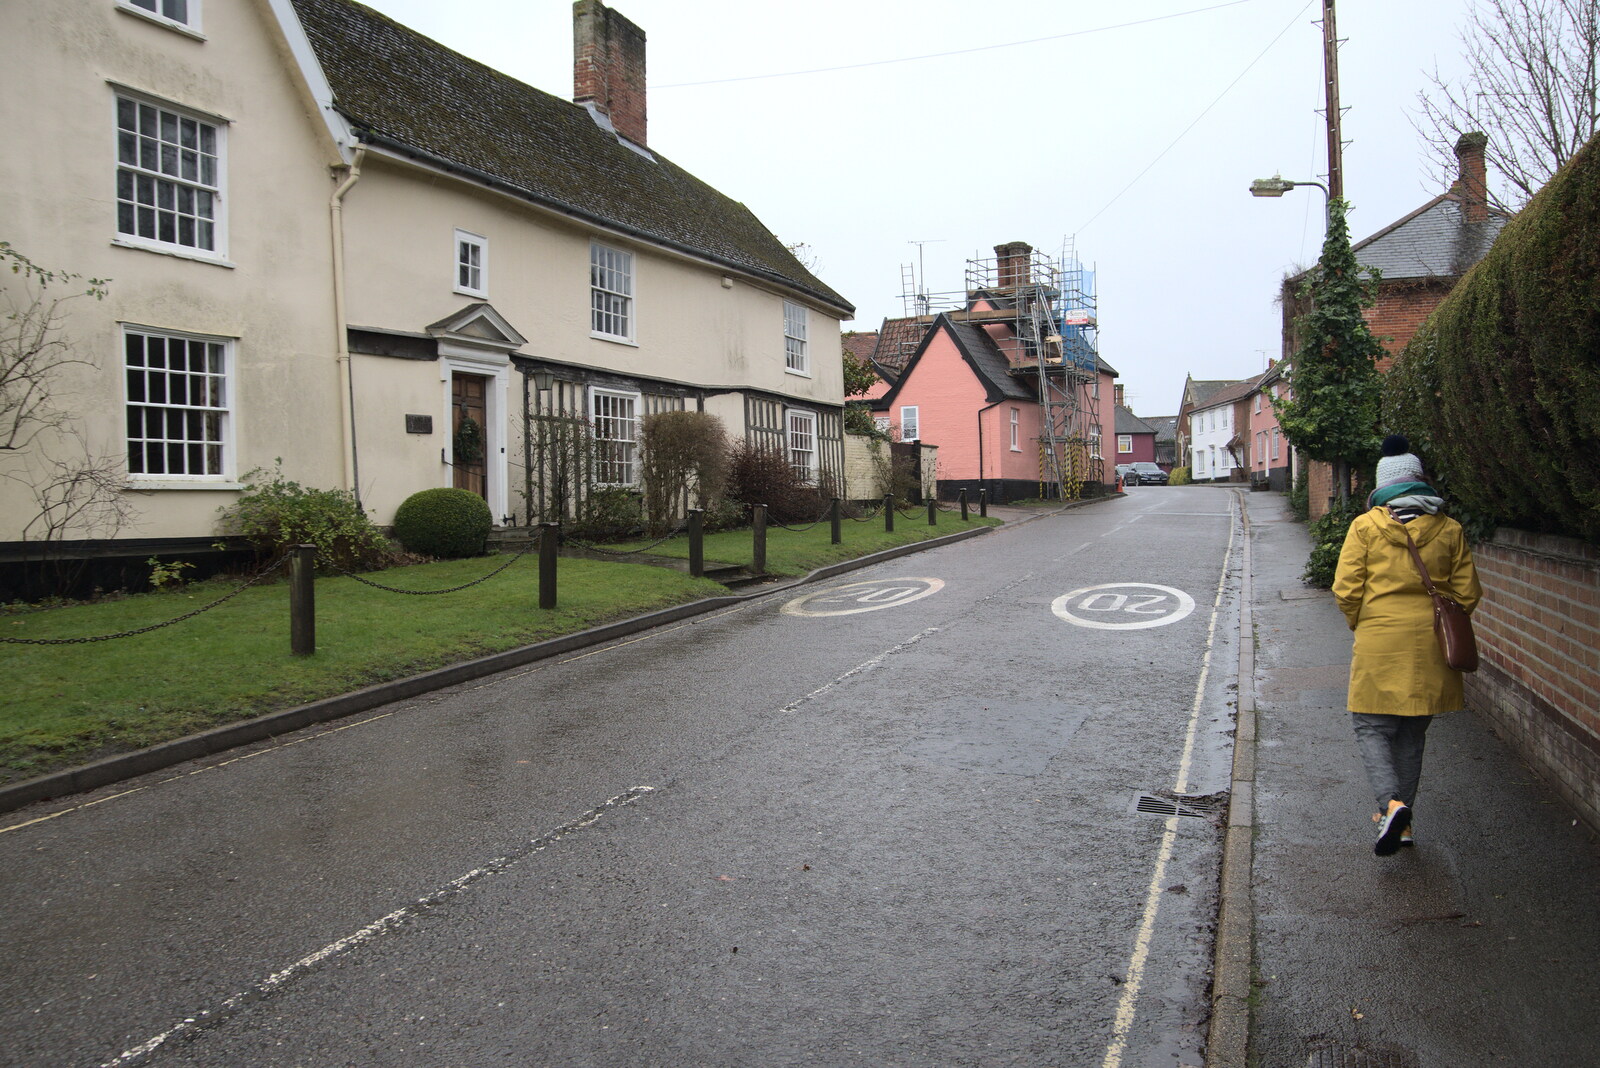 Isobel walks along Castle Street from New Year's Day, Brome, Suffolk - 1st January 2022